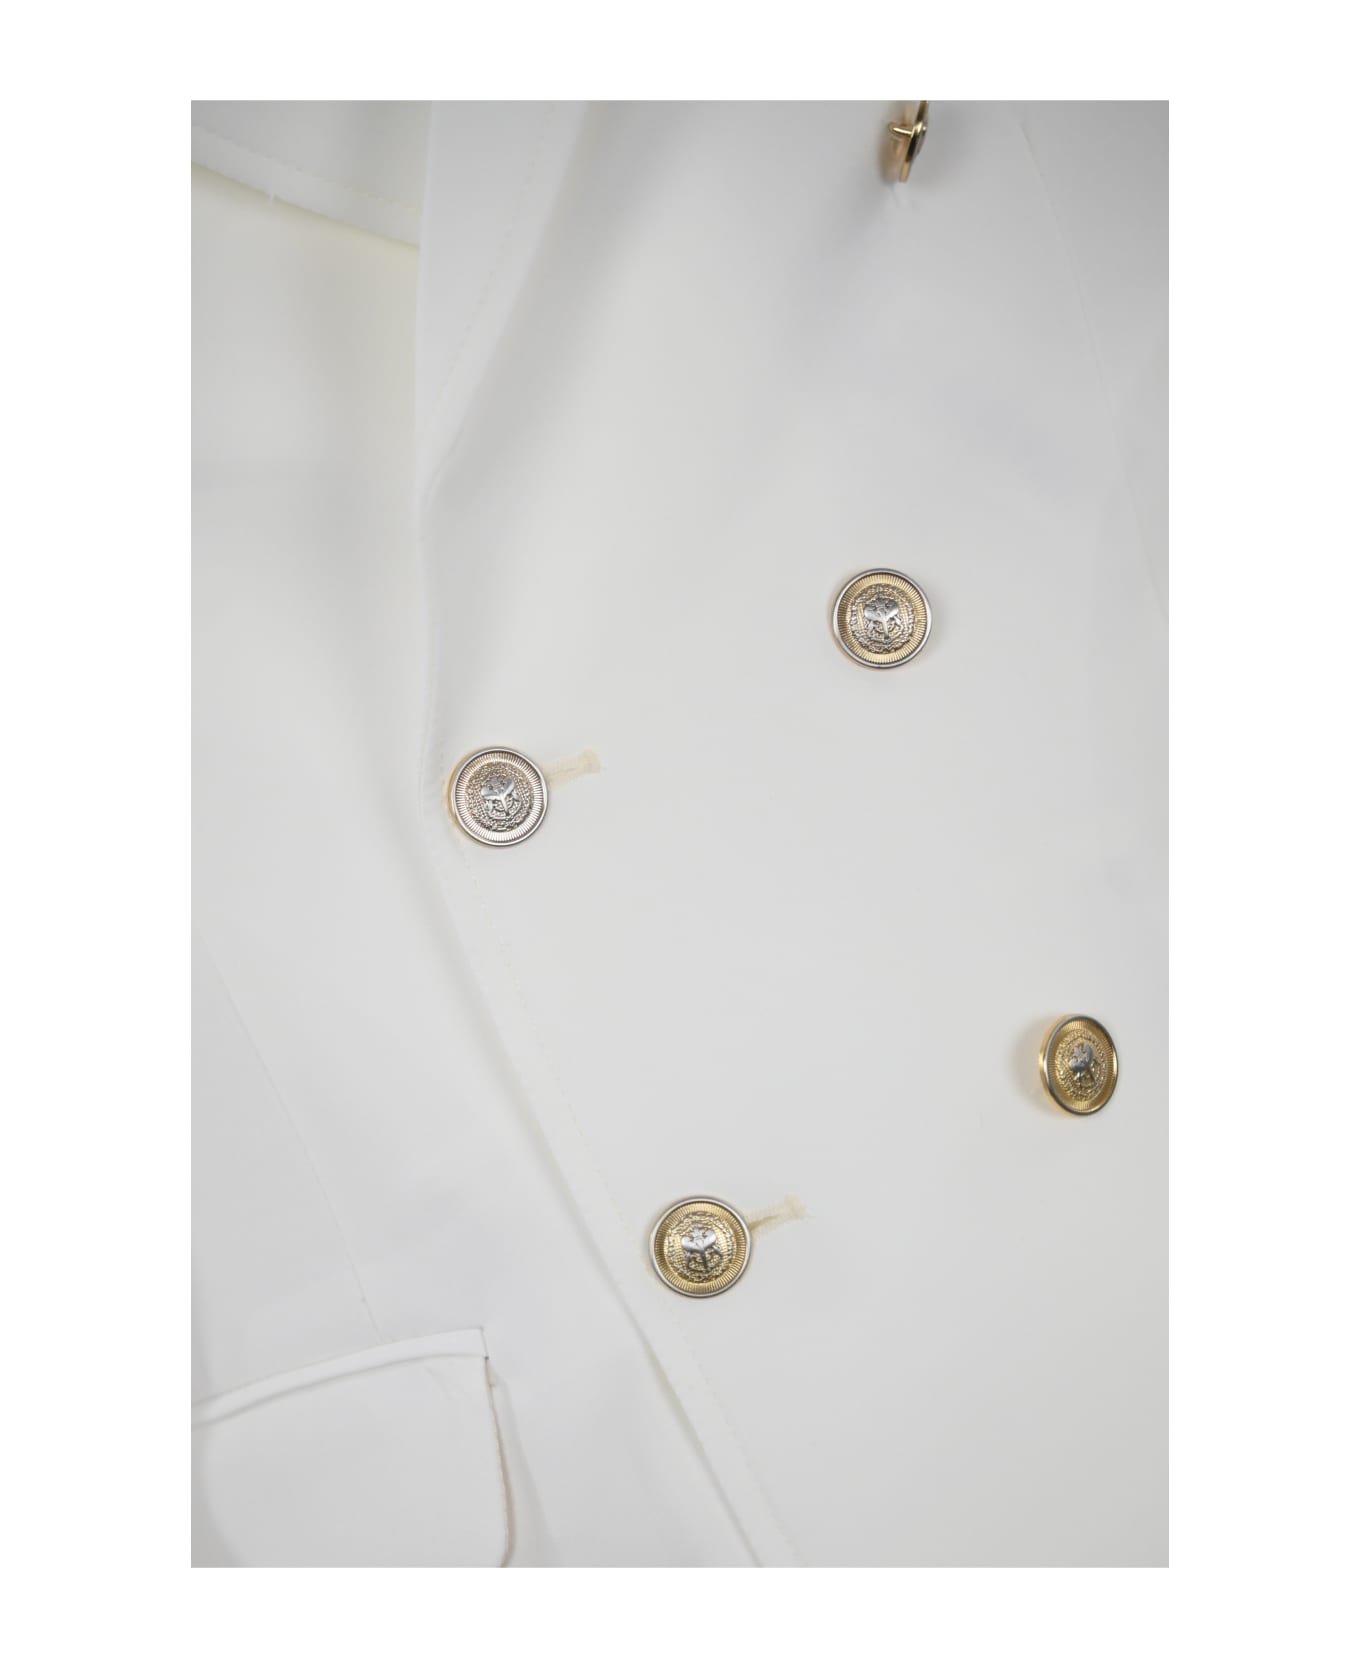 Daniele Alessandrini White Double-breasted Suit - Panna